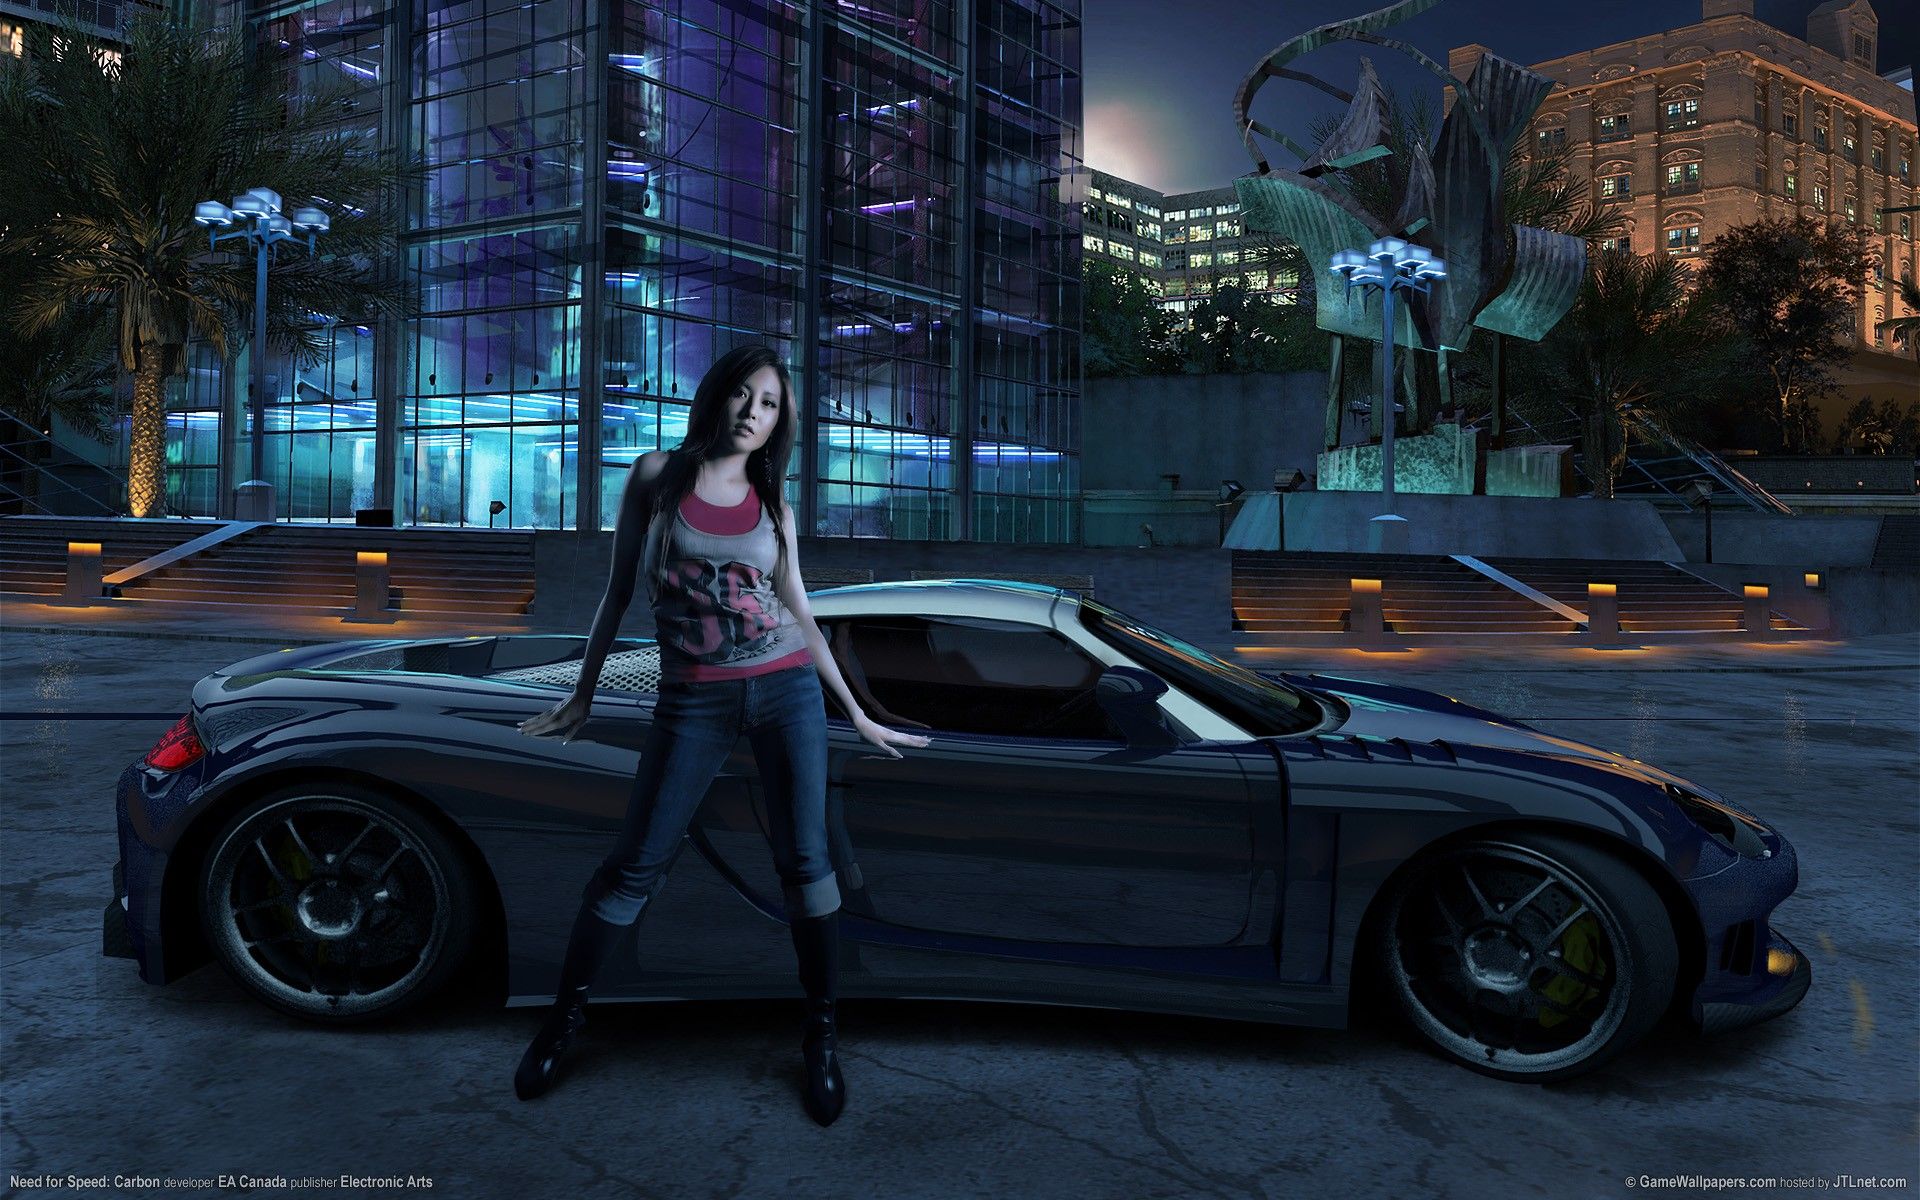 Need for speed carbon Girl Wallpaper